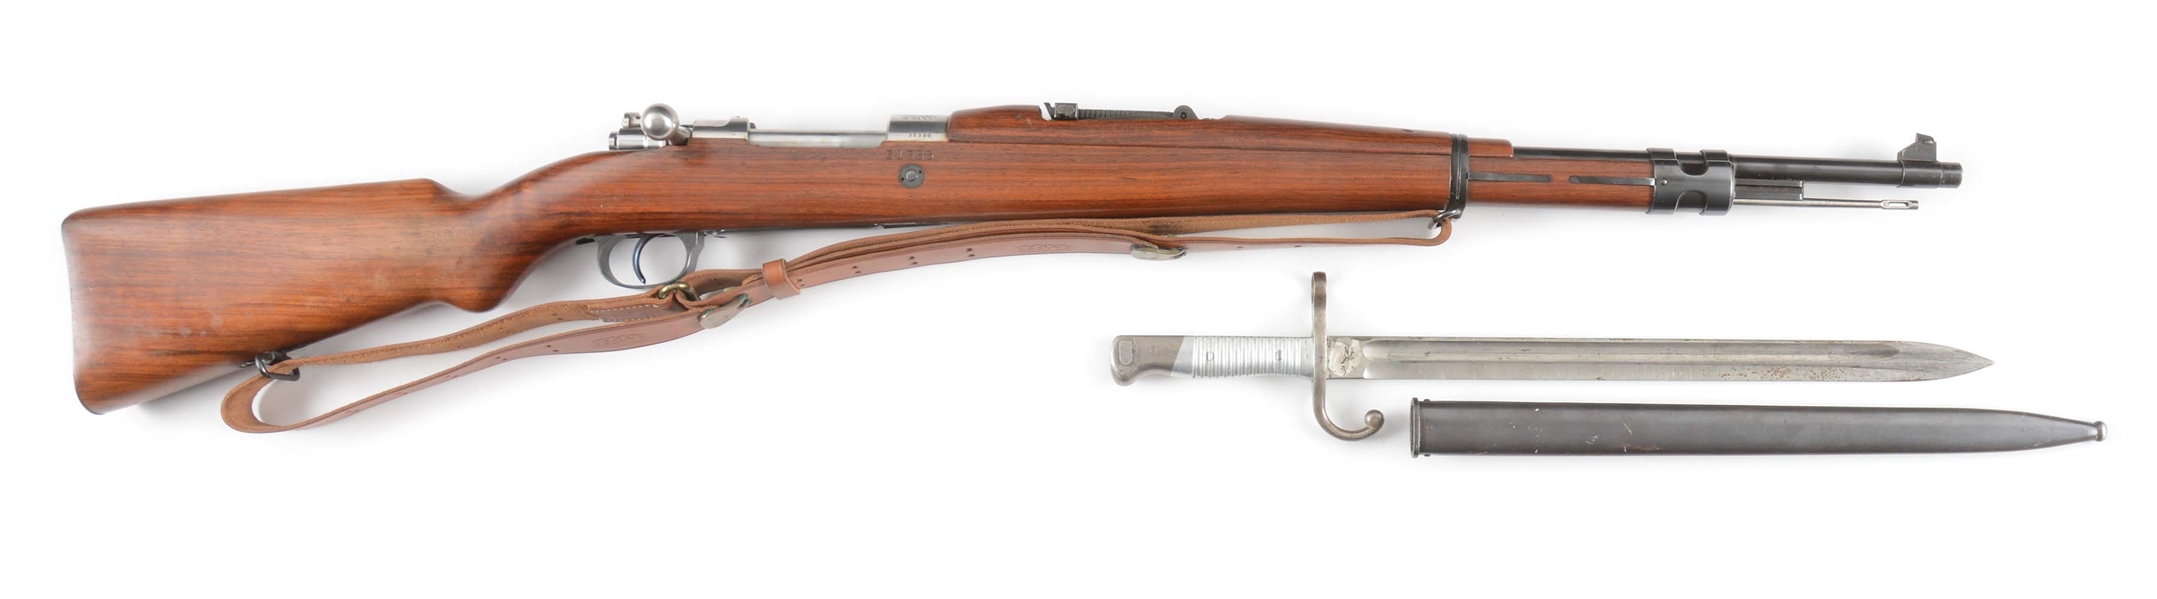 (C) VERY FINE VENEZUELAN CONTRACT FN 24/30 MAUSER RIFLE WITH LEATHER COVER & ARGENTINE BAYONET.